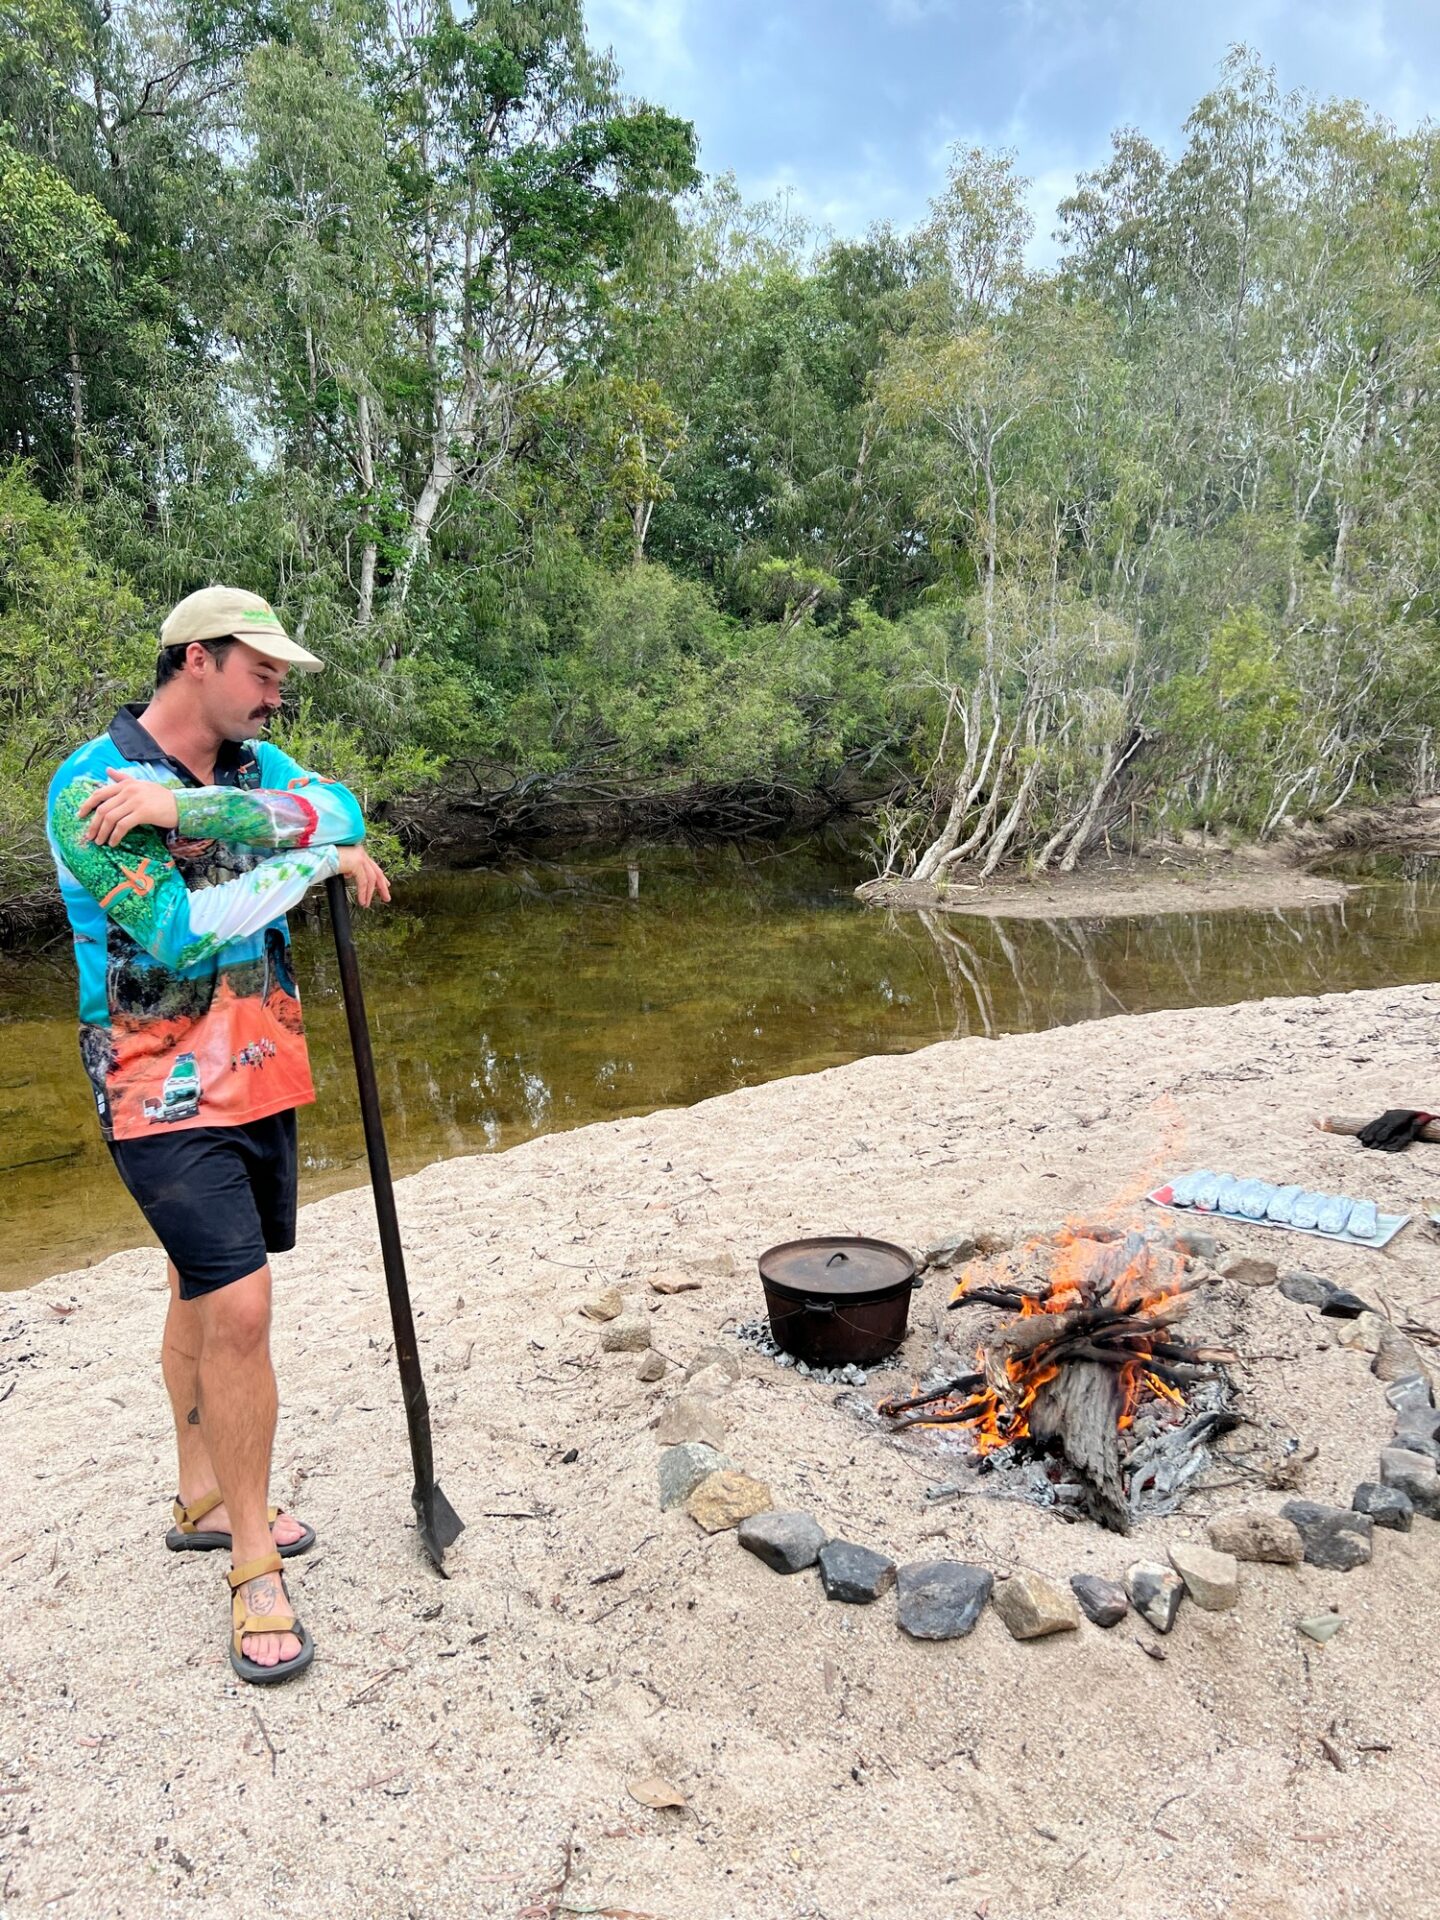 chef cooking on fire next to creek in cape york